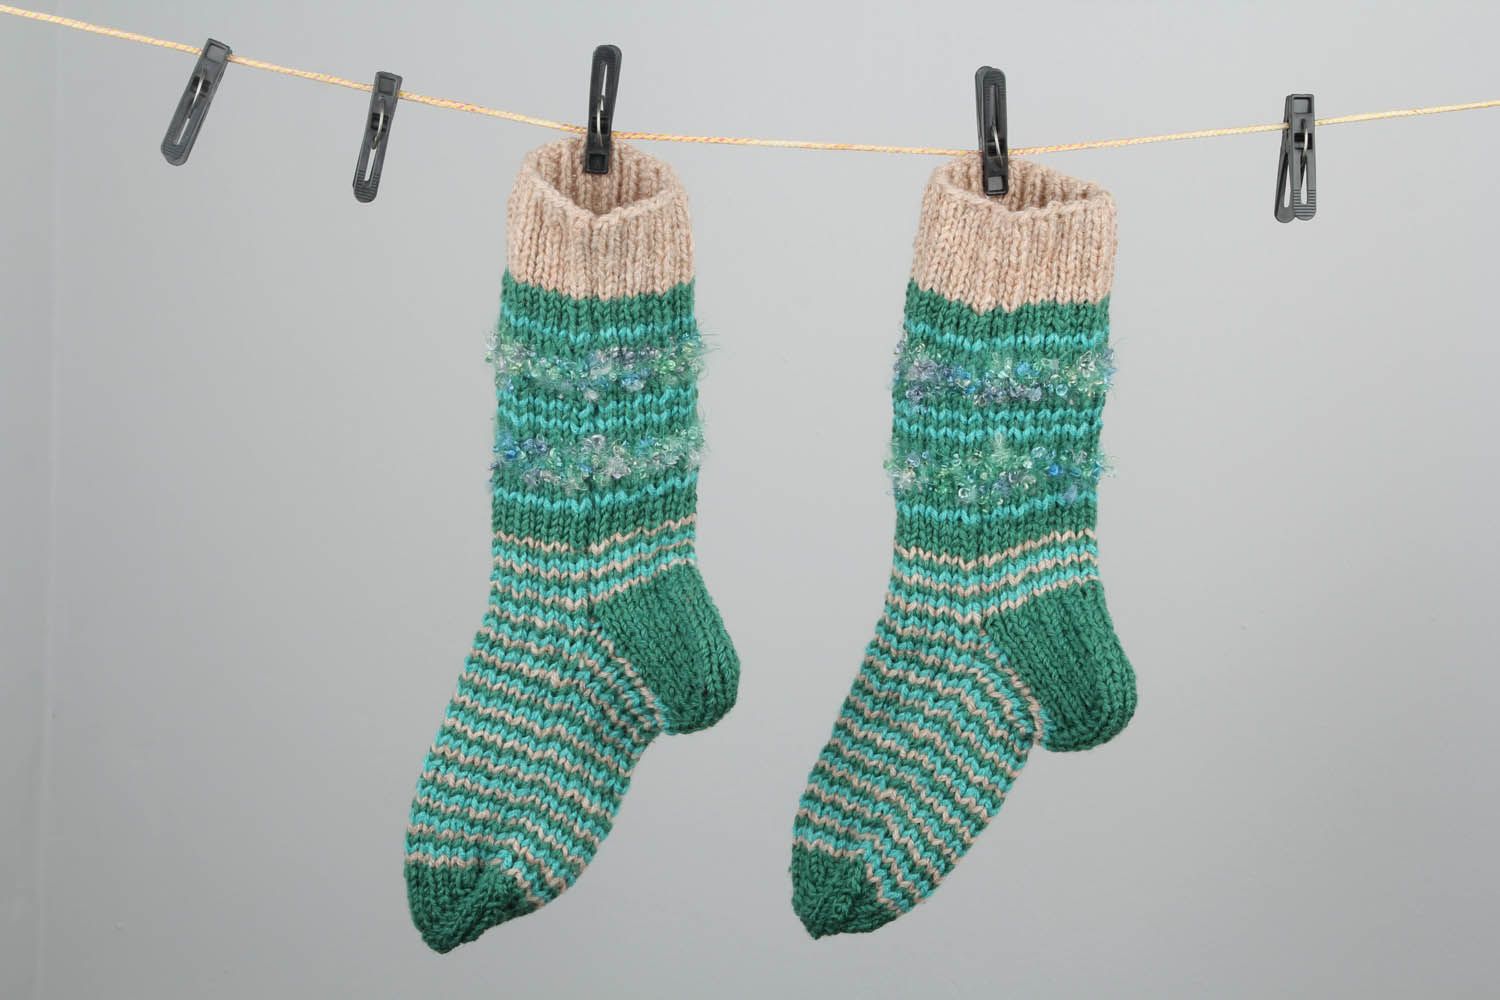 Socks knitted of woolen and semi-woolen threads photo 1